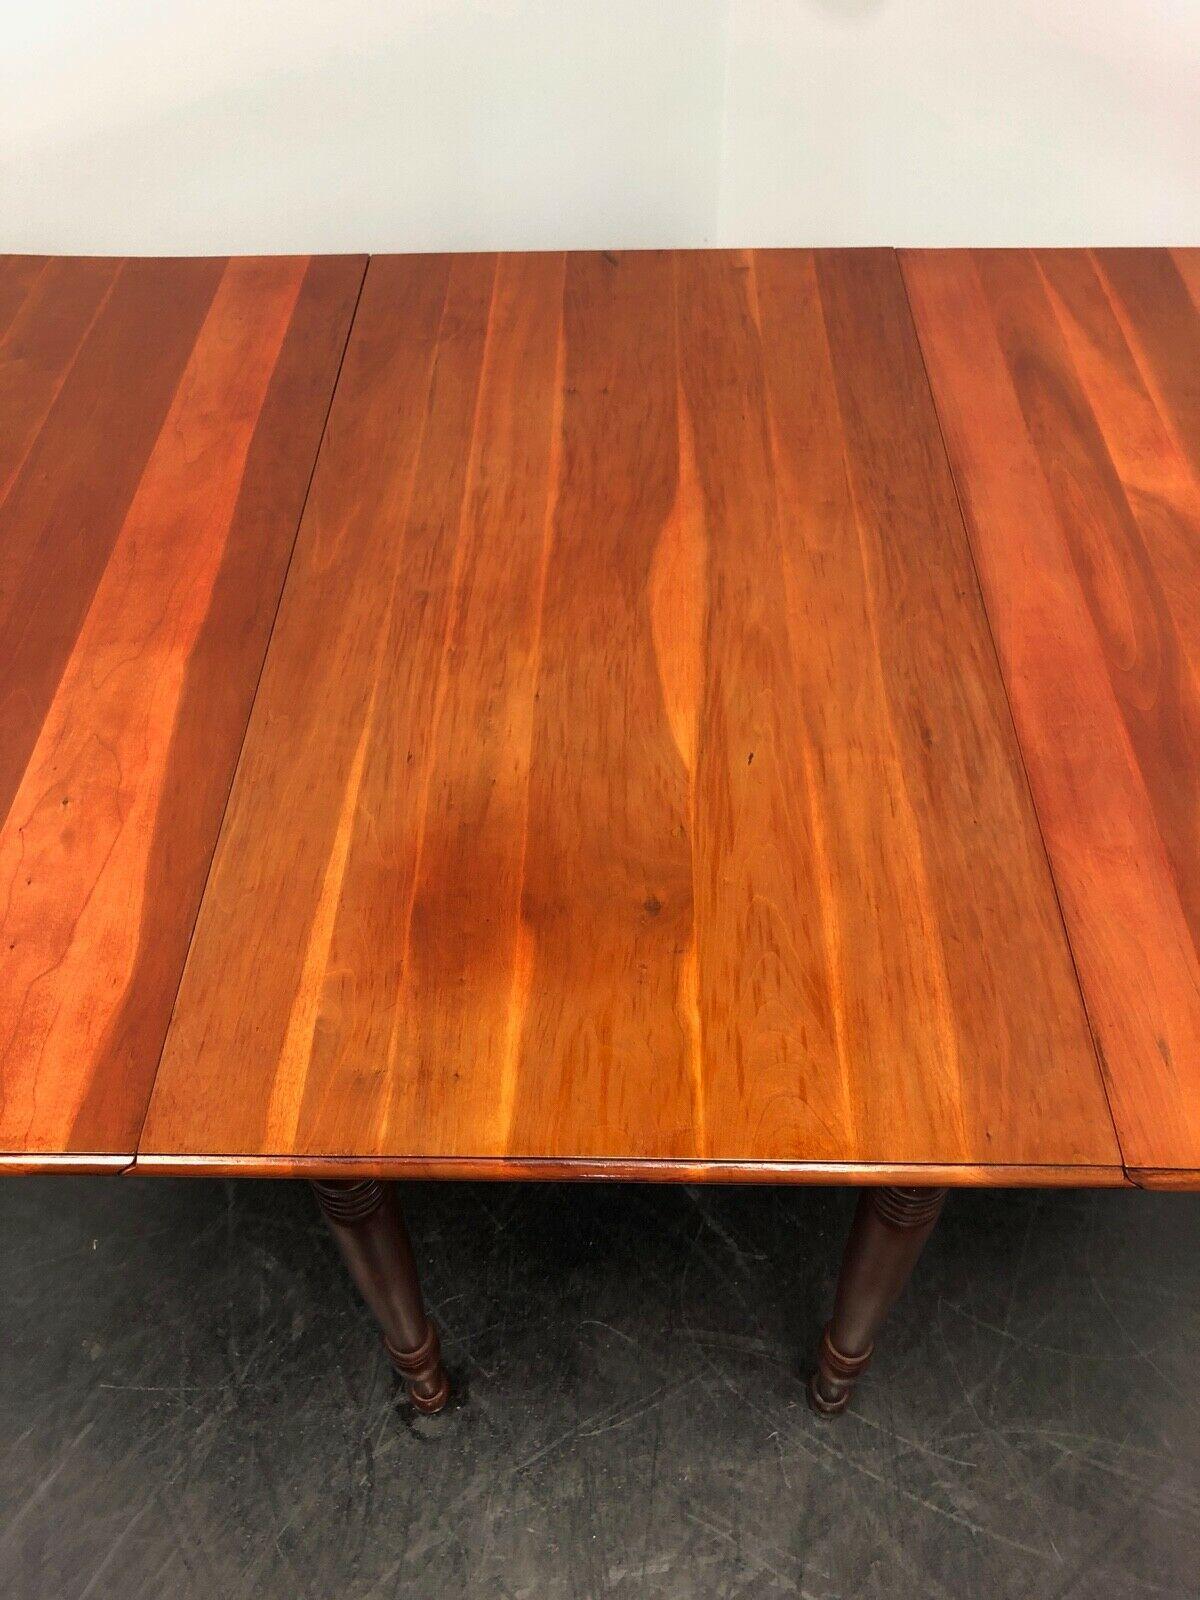 American Antique Cherry Gateleg Drop-Leaf Dining Table For Sale